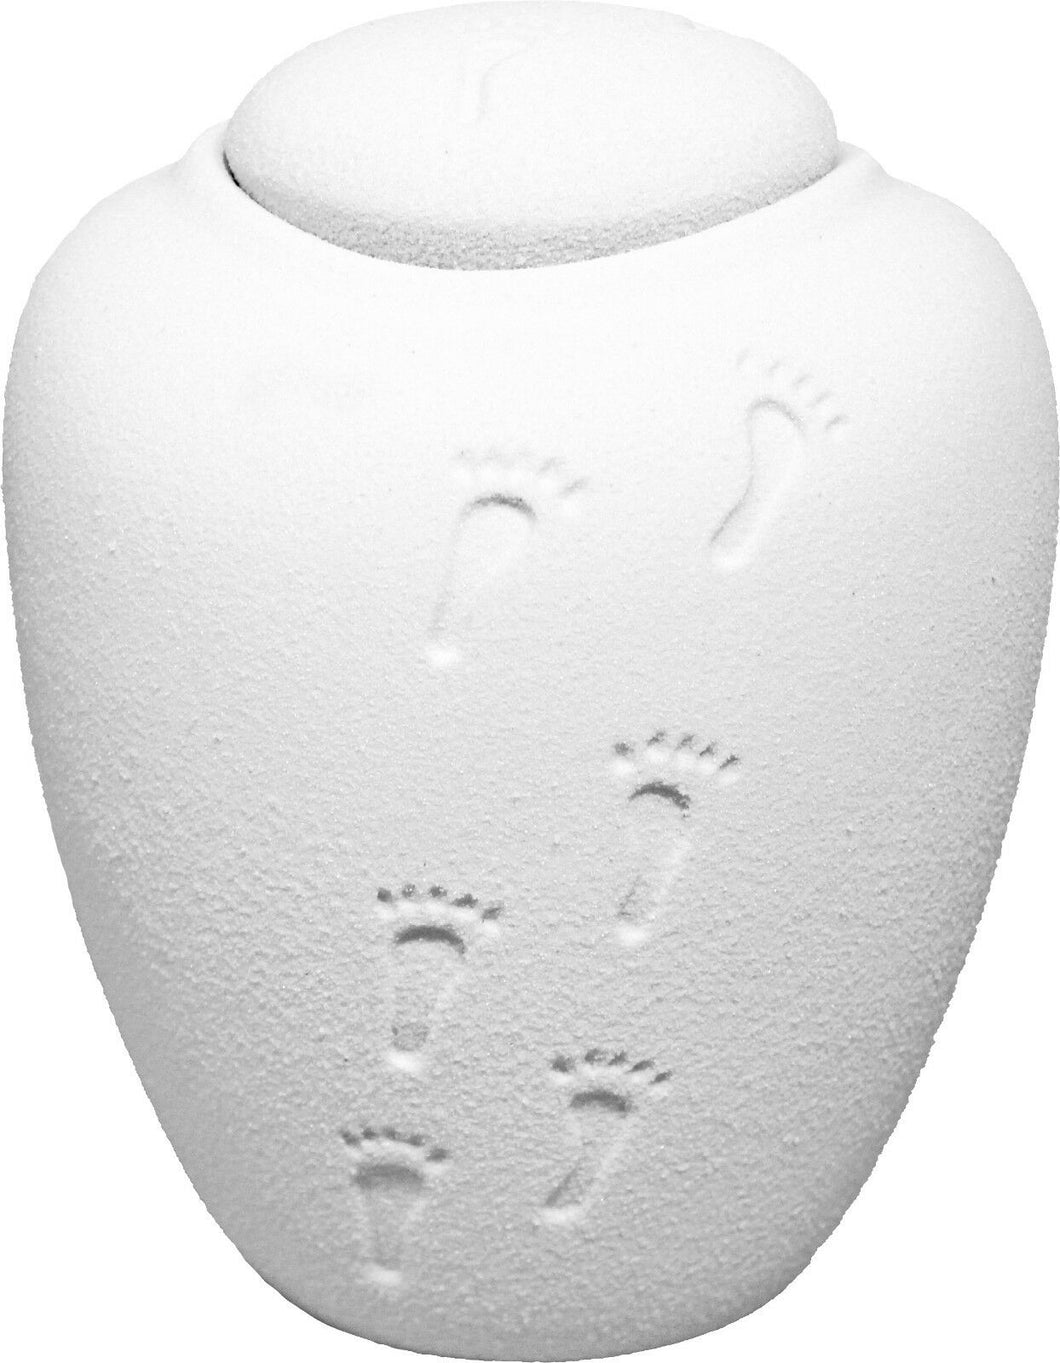 Biodegradable, Oceane White Sand and Gelatin Funeral Cremation Urn